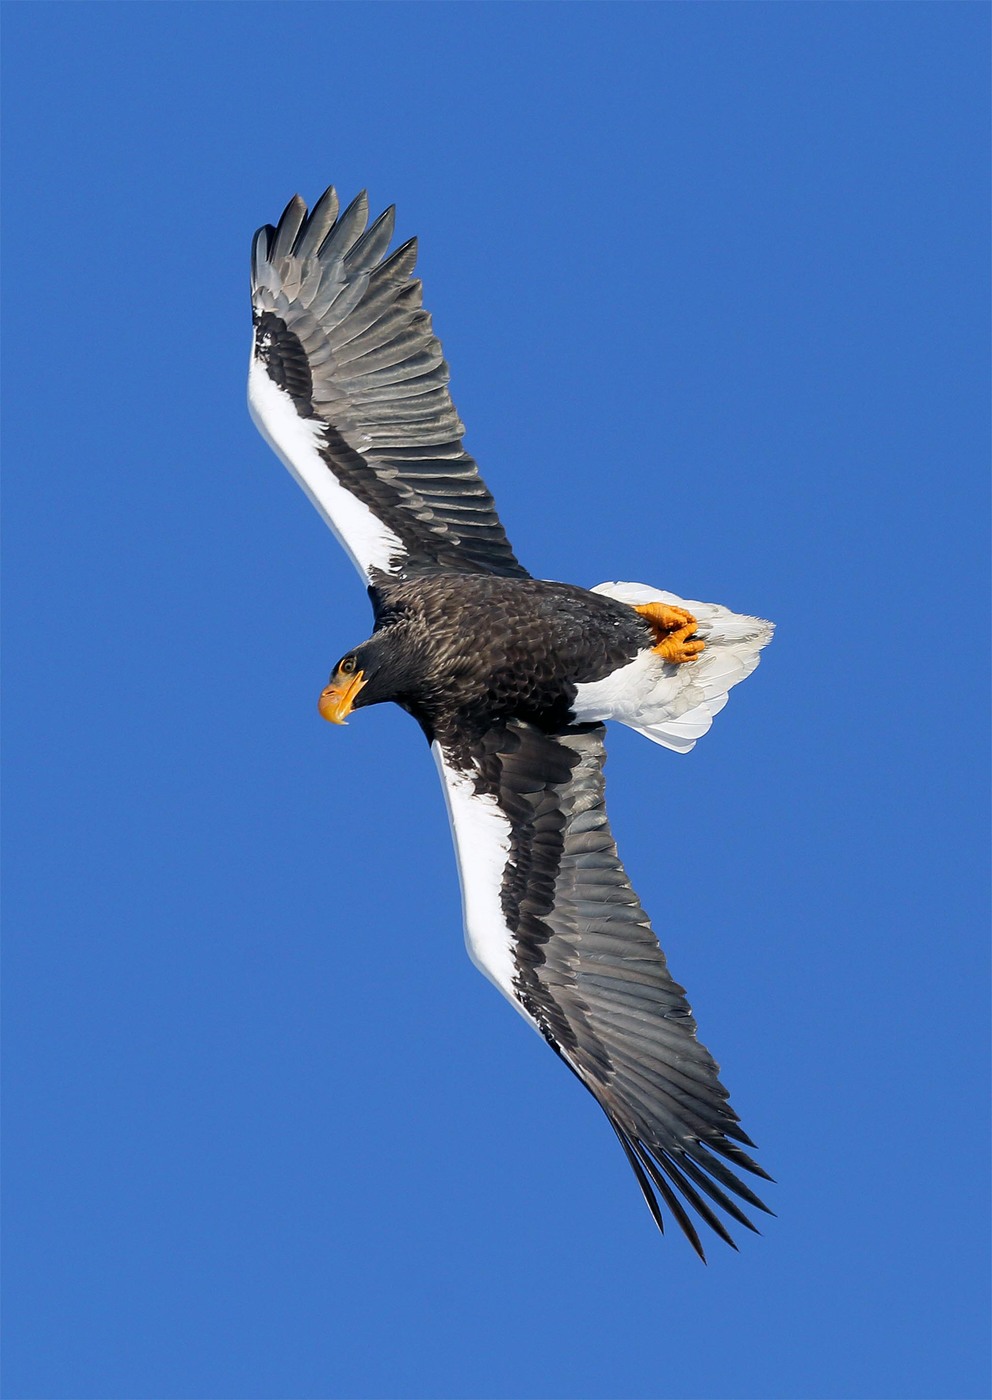 Bald eagle soars in the sky